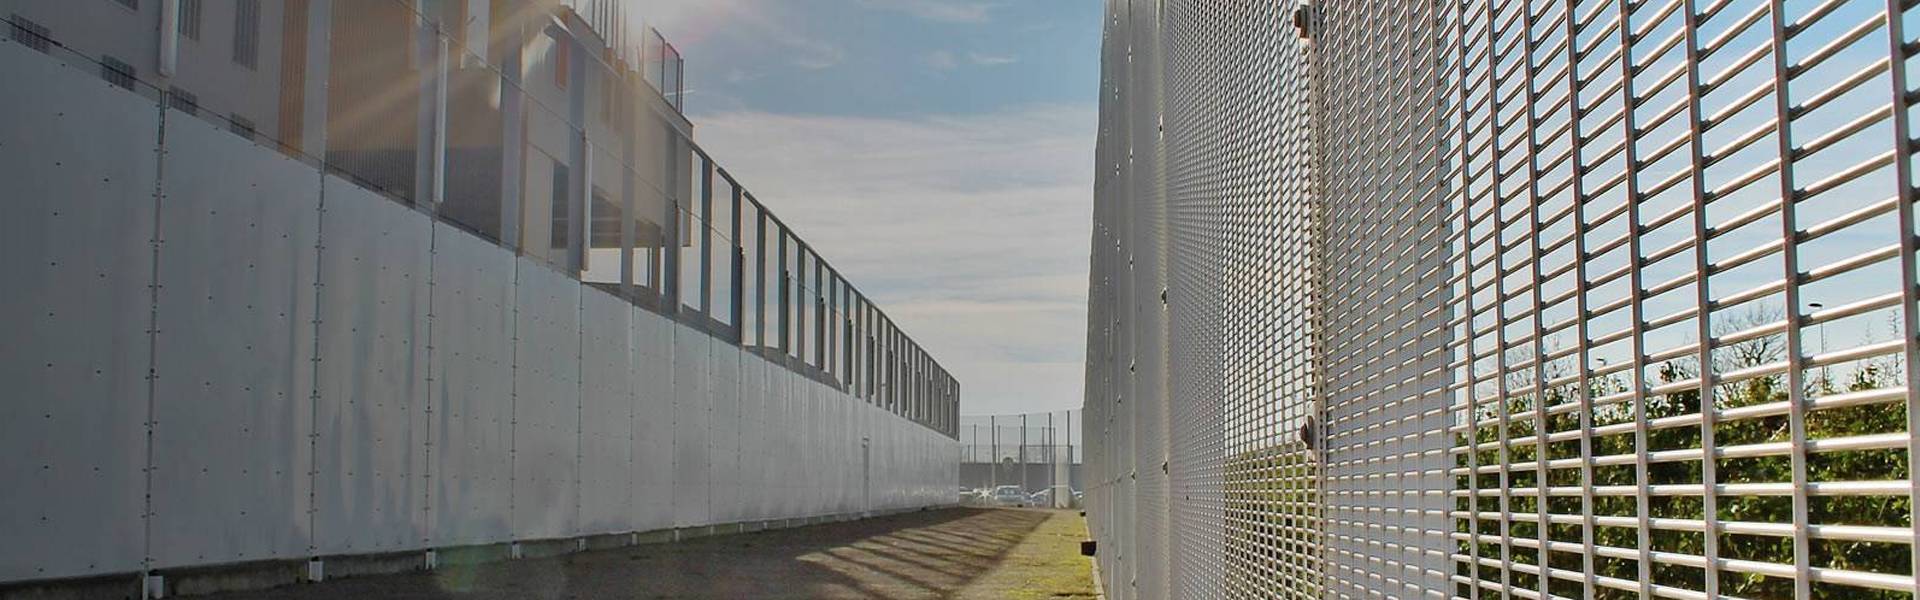 Anti climb fence panel installed for the maximum protection of the plant.